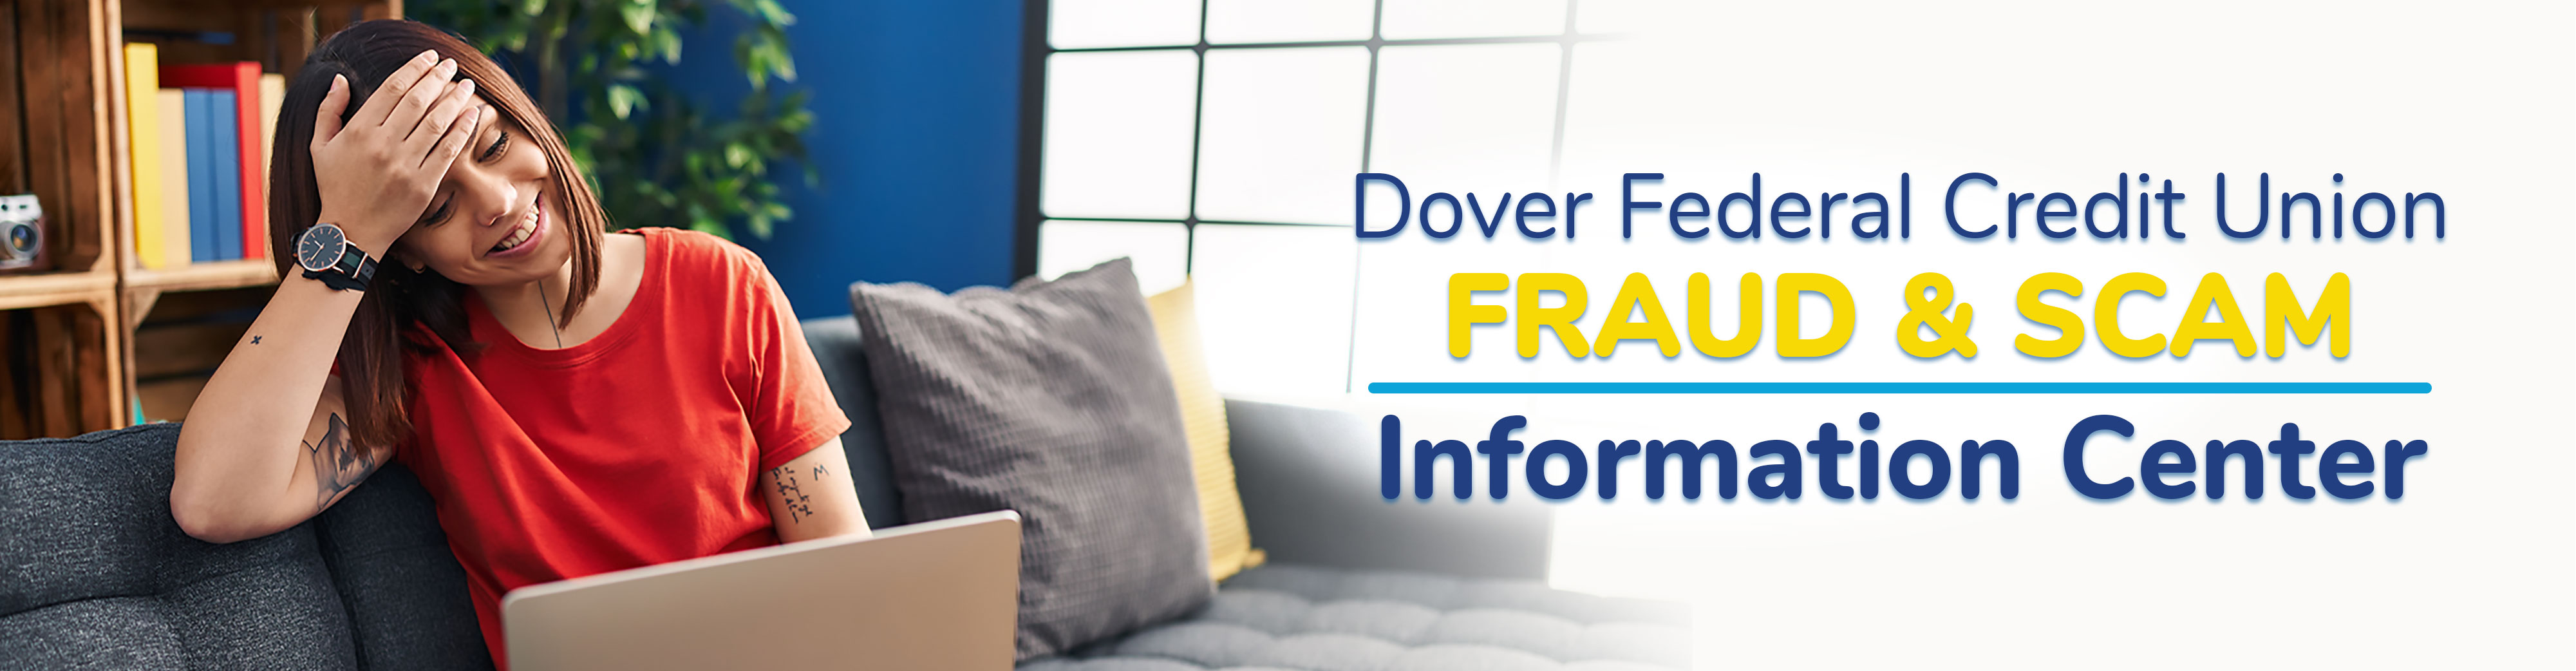 Dover Federal Credit Union Fraud & Scam Information Center